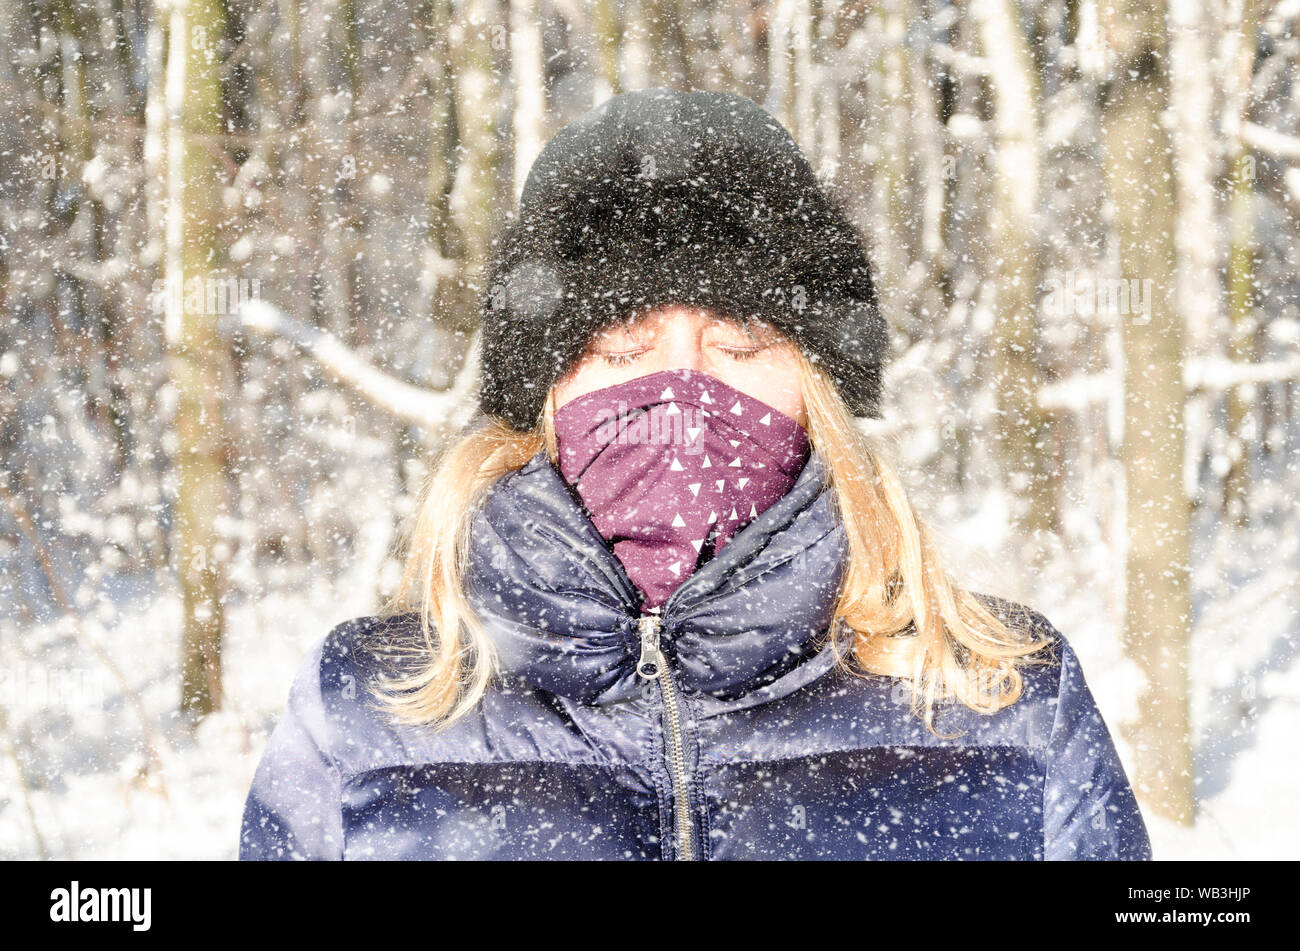 A blonde woman with her eyes closed and a scarf on her mouth enjoys the freezing cold of a snowy winter forest Stock Photo